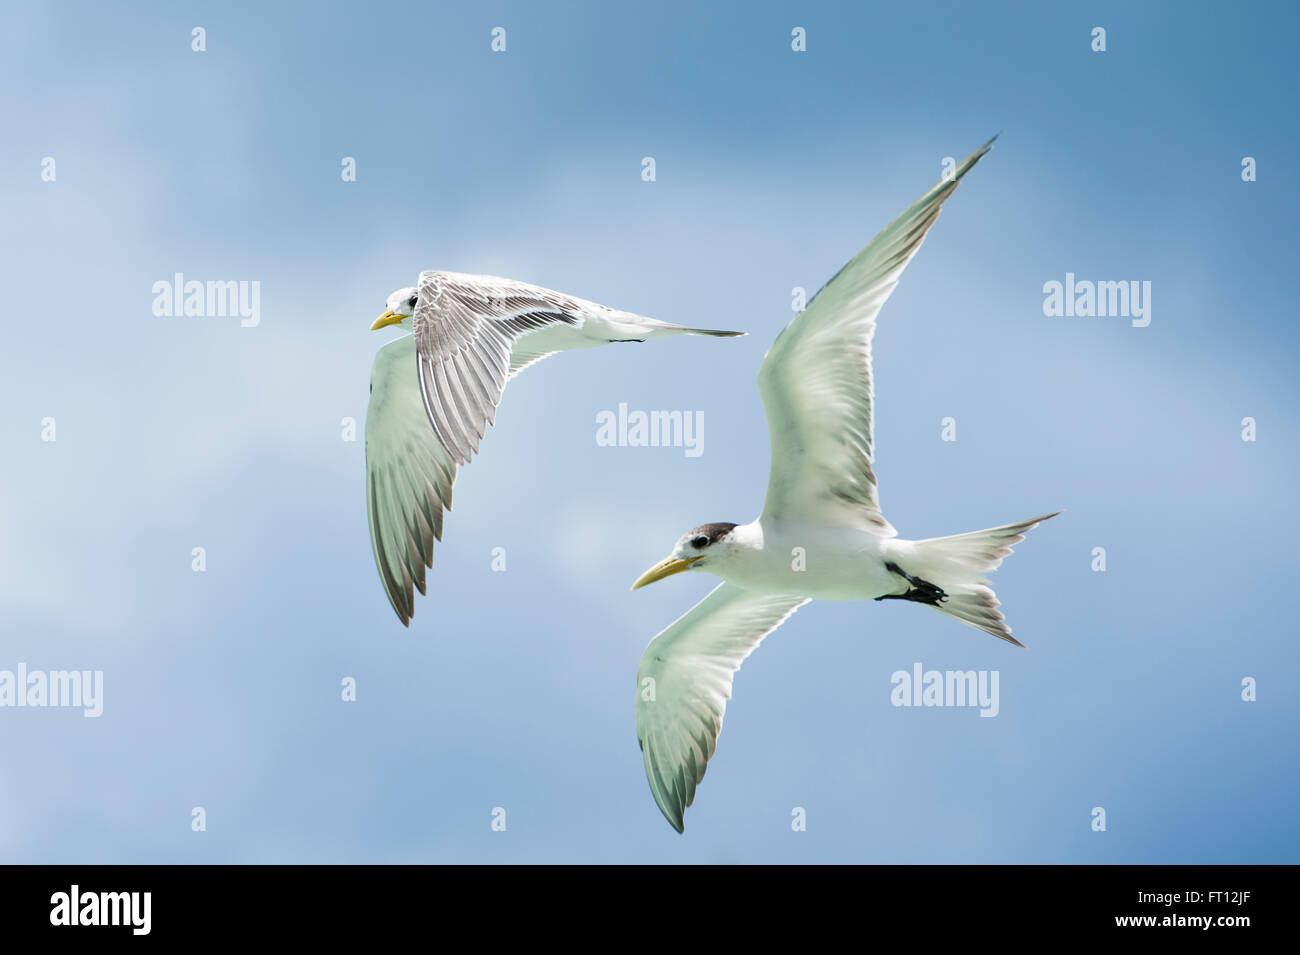 Two Sea Terns flying close together, Mataiva, Tuamotu Islands, French Polynesia, South Pacific Stock Photo